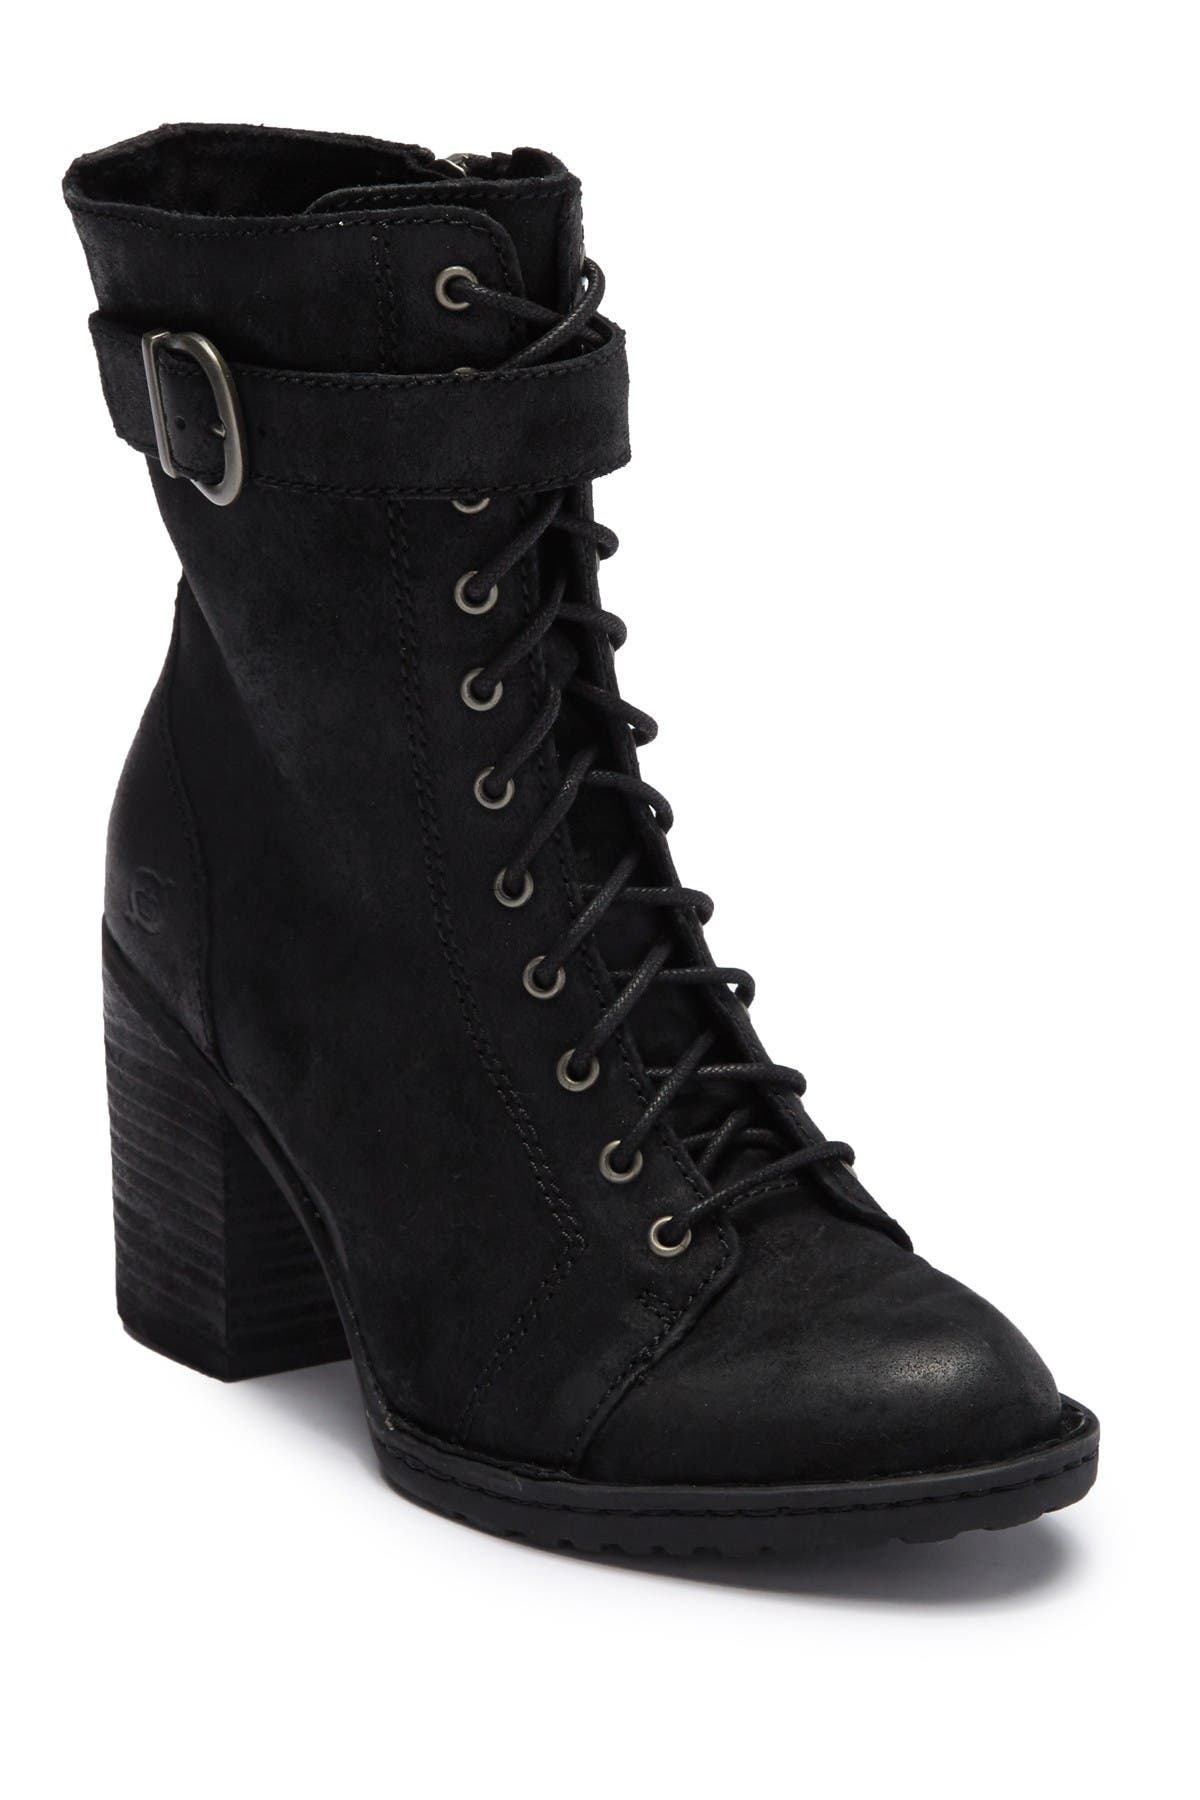 born leather lace up granny boots